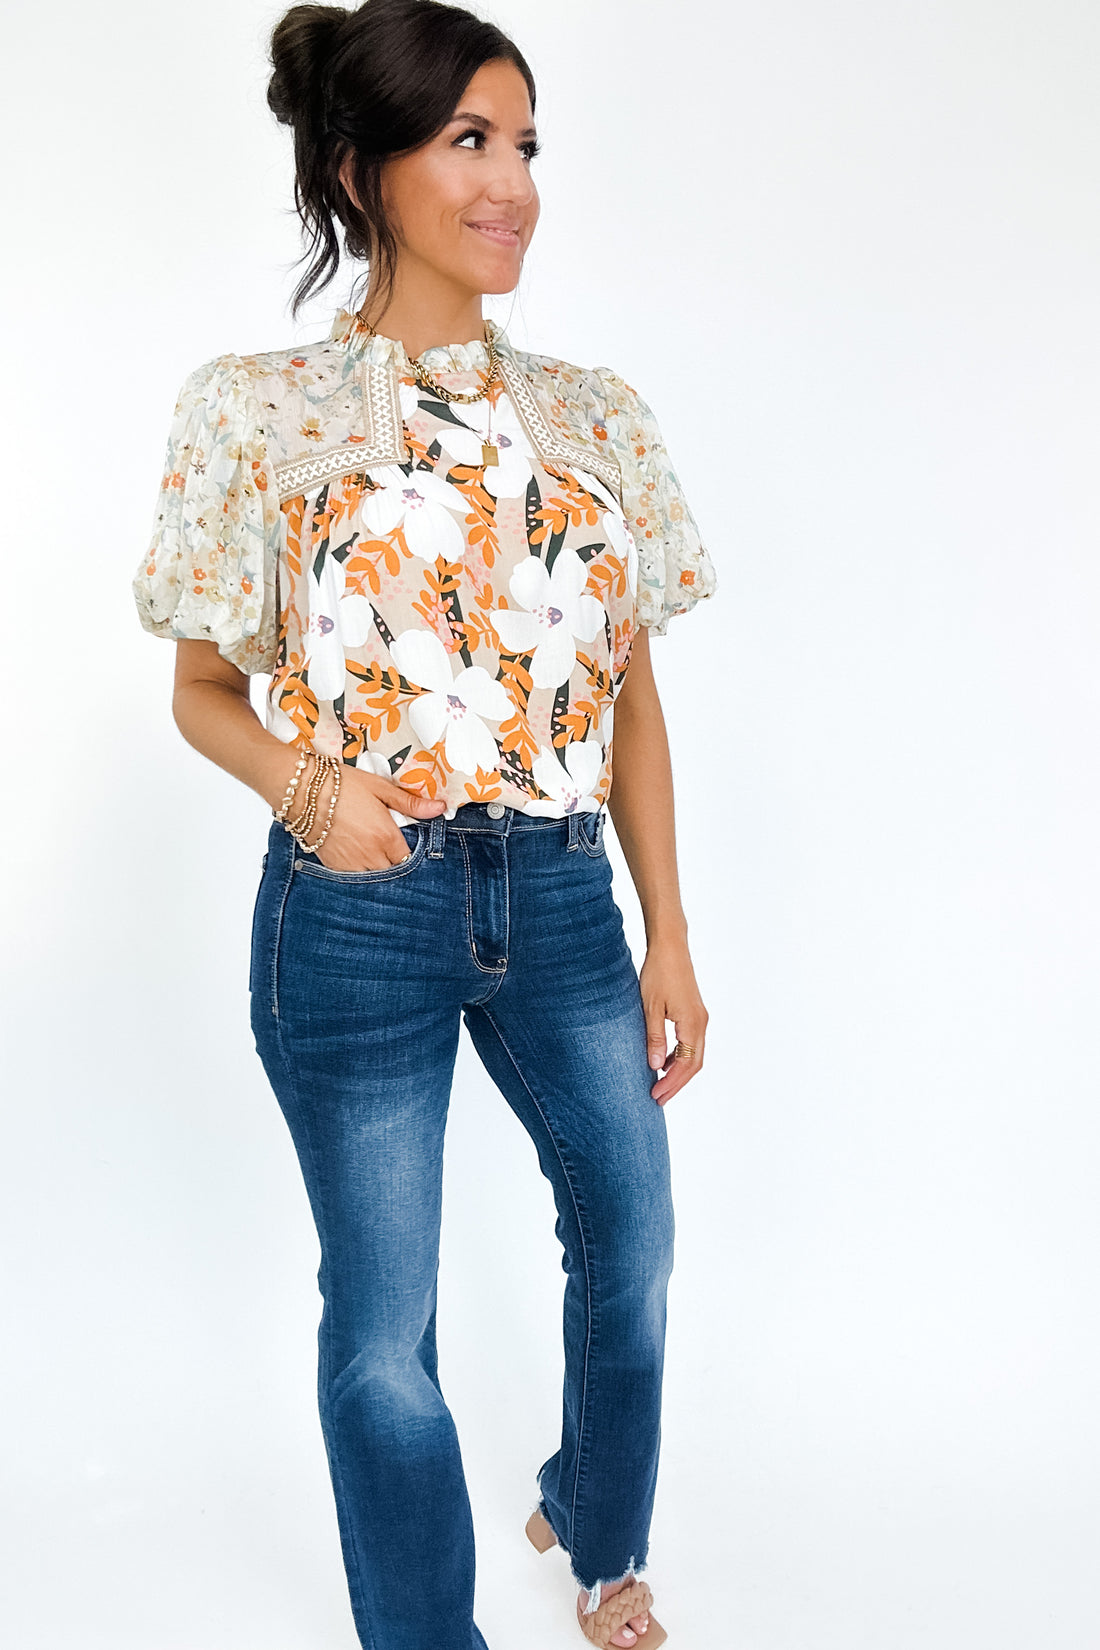 Daydreamer Mixed Floral Top - WEBSITE EXCLUSIVE